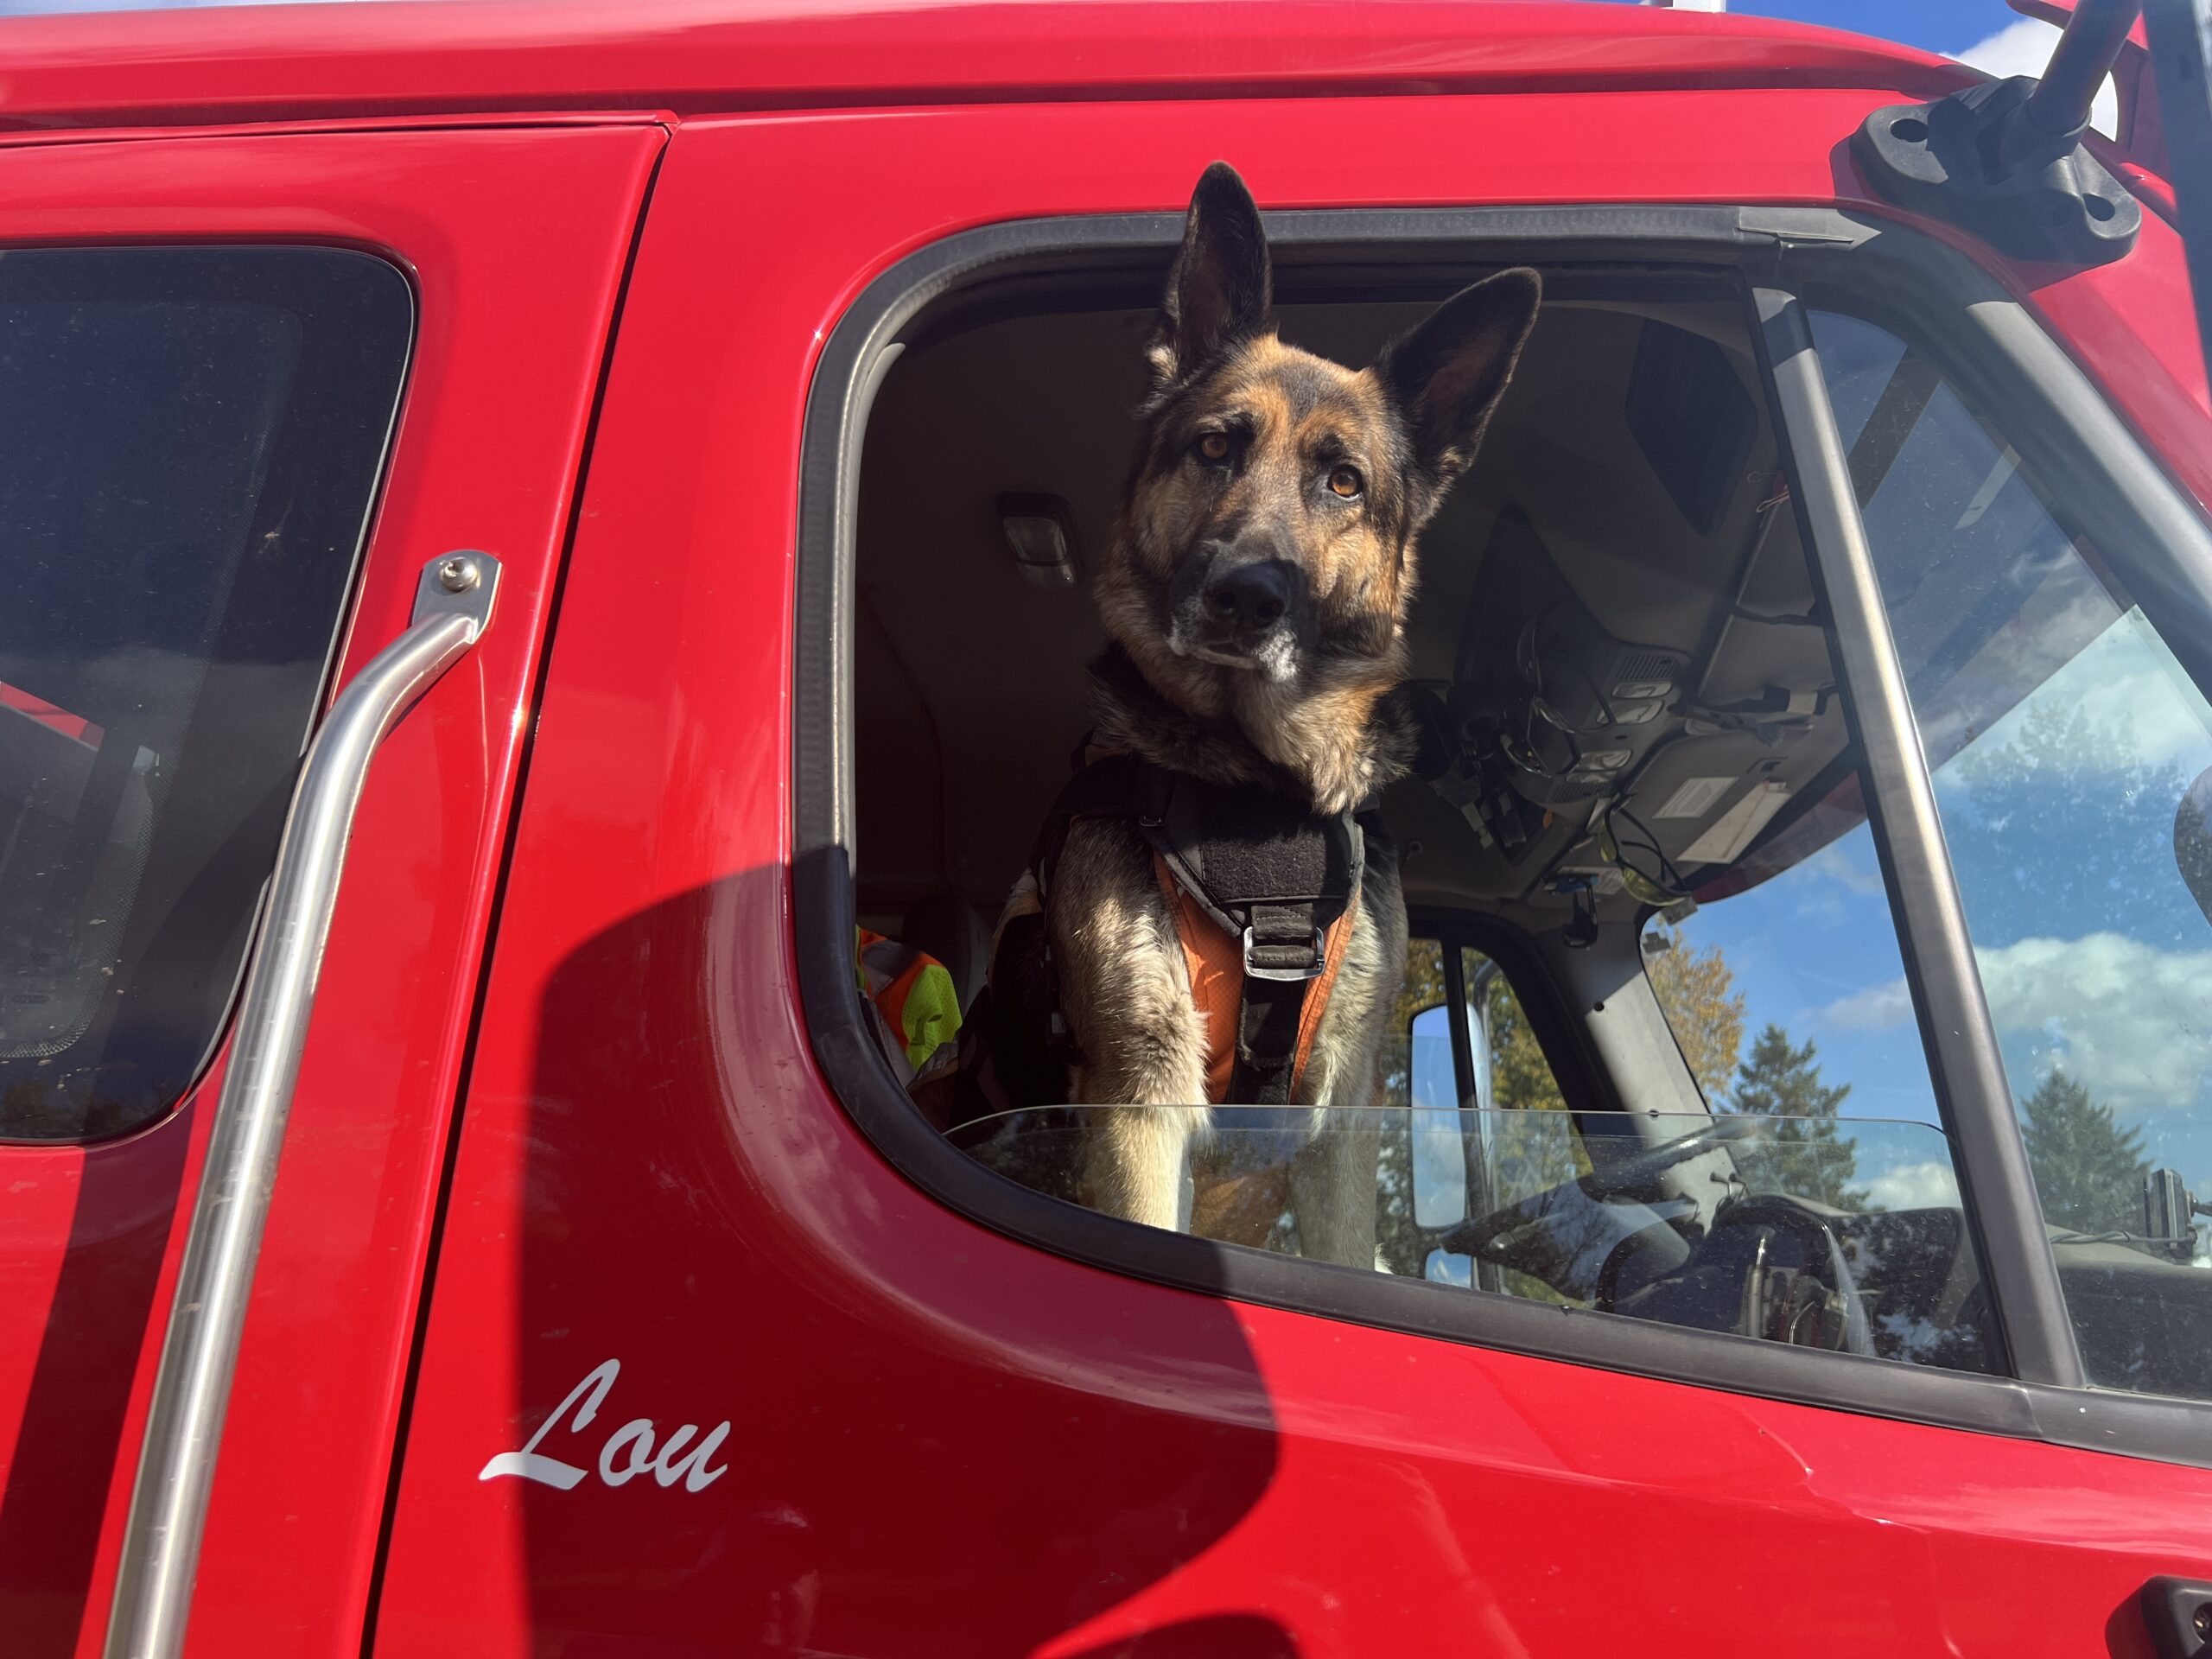 A photo of a German shepherd dog named Lou in the truck of one of the engineers at Hoffman Construction Company